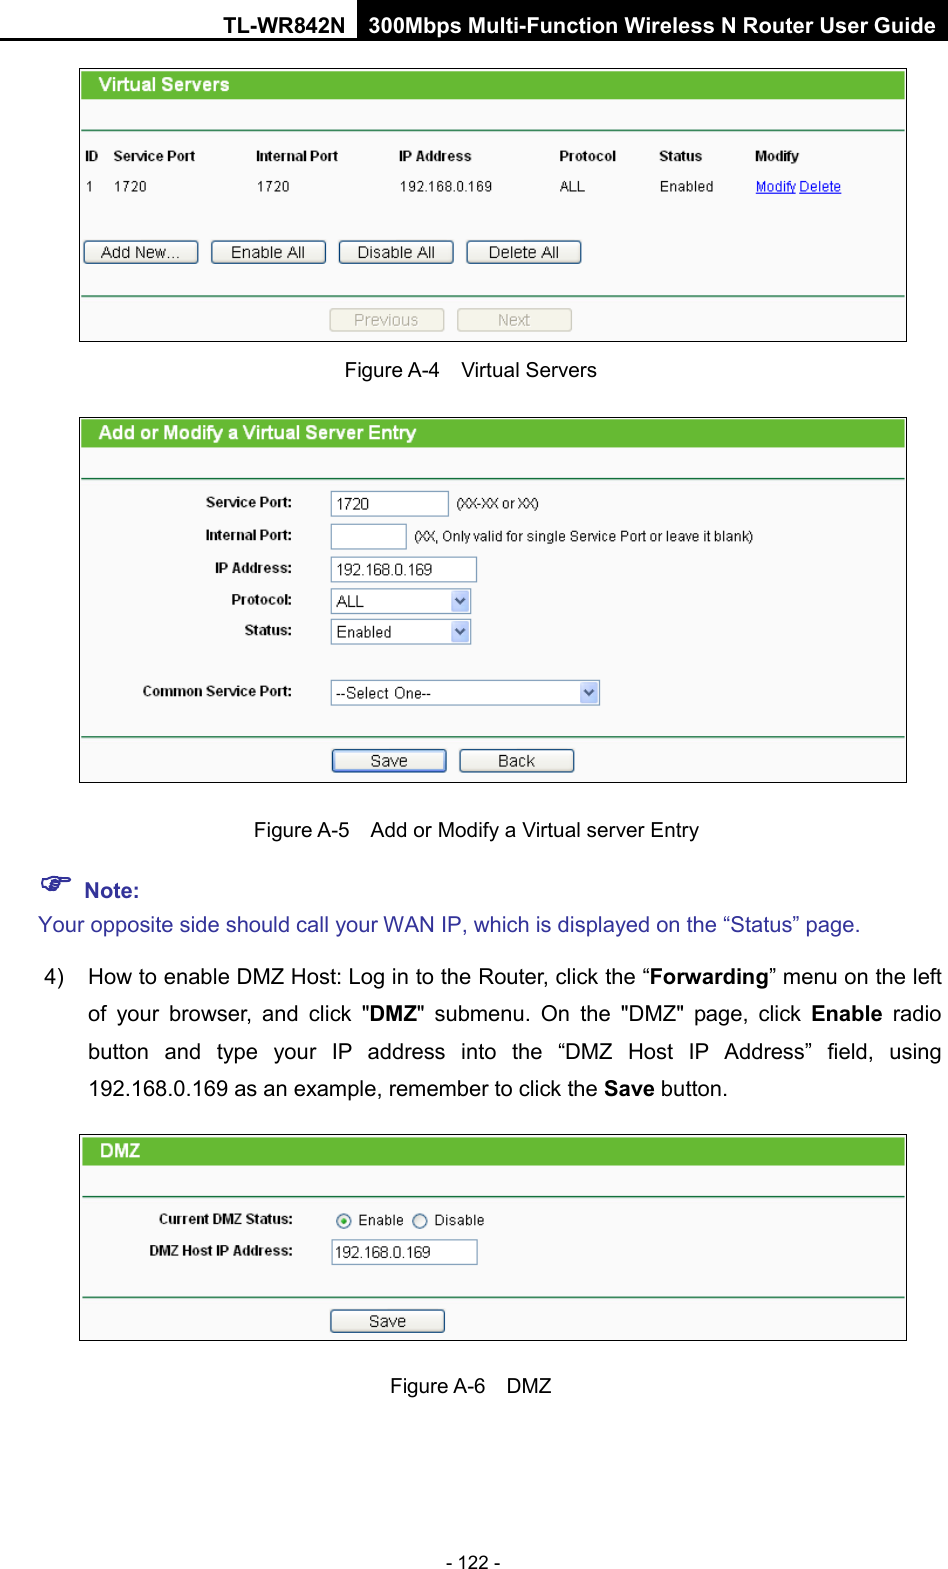 TL-WR842N 300Mbps Multi-Function Wireless N Router User Guide  - 122 -  Figure A-4    Virtual Servers   Figure A-5   Add or Modify a Virtual server Entry  Note: Your opposite side should call your WAN IP, which is displayed on the “Status” page. 4) How to enable DMZ Host: Log in to the Router, click the “Forwarding” menu on the left of your browser, and click &quot;DMZ&quot; submenu. On the &quot;DMZ&quot; page, click Enable radio button and type your IP address into the “DMZ Host IP Address” field, using 192.168.0.169 as an example, remember to click the Save button.    Figure A-6  DMZ 